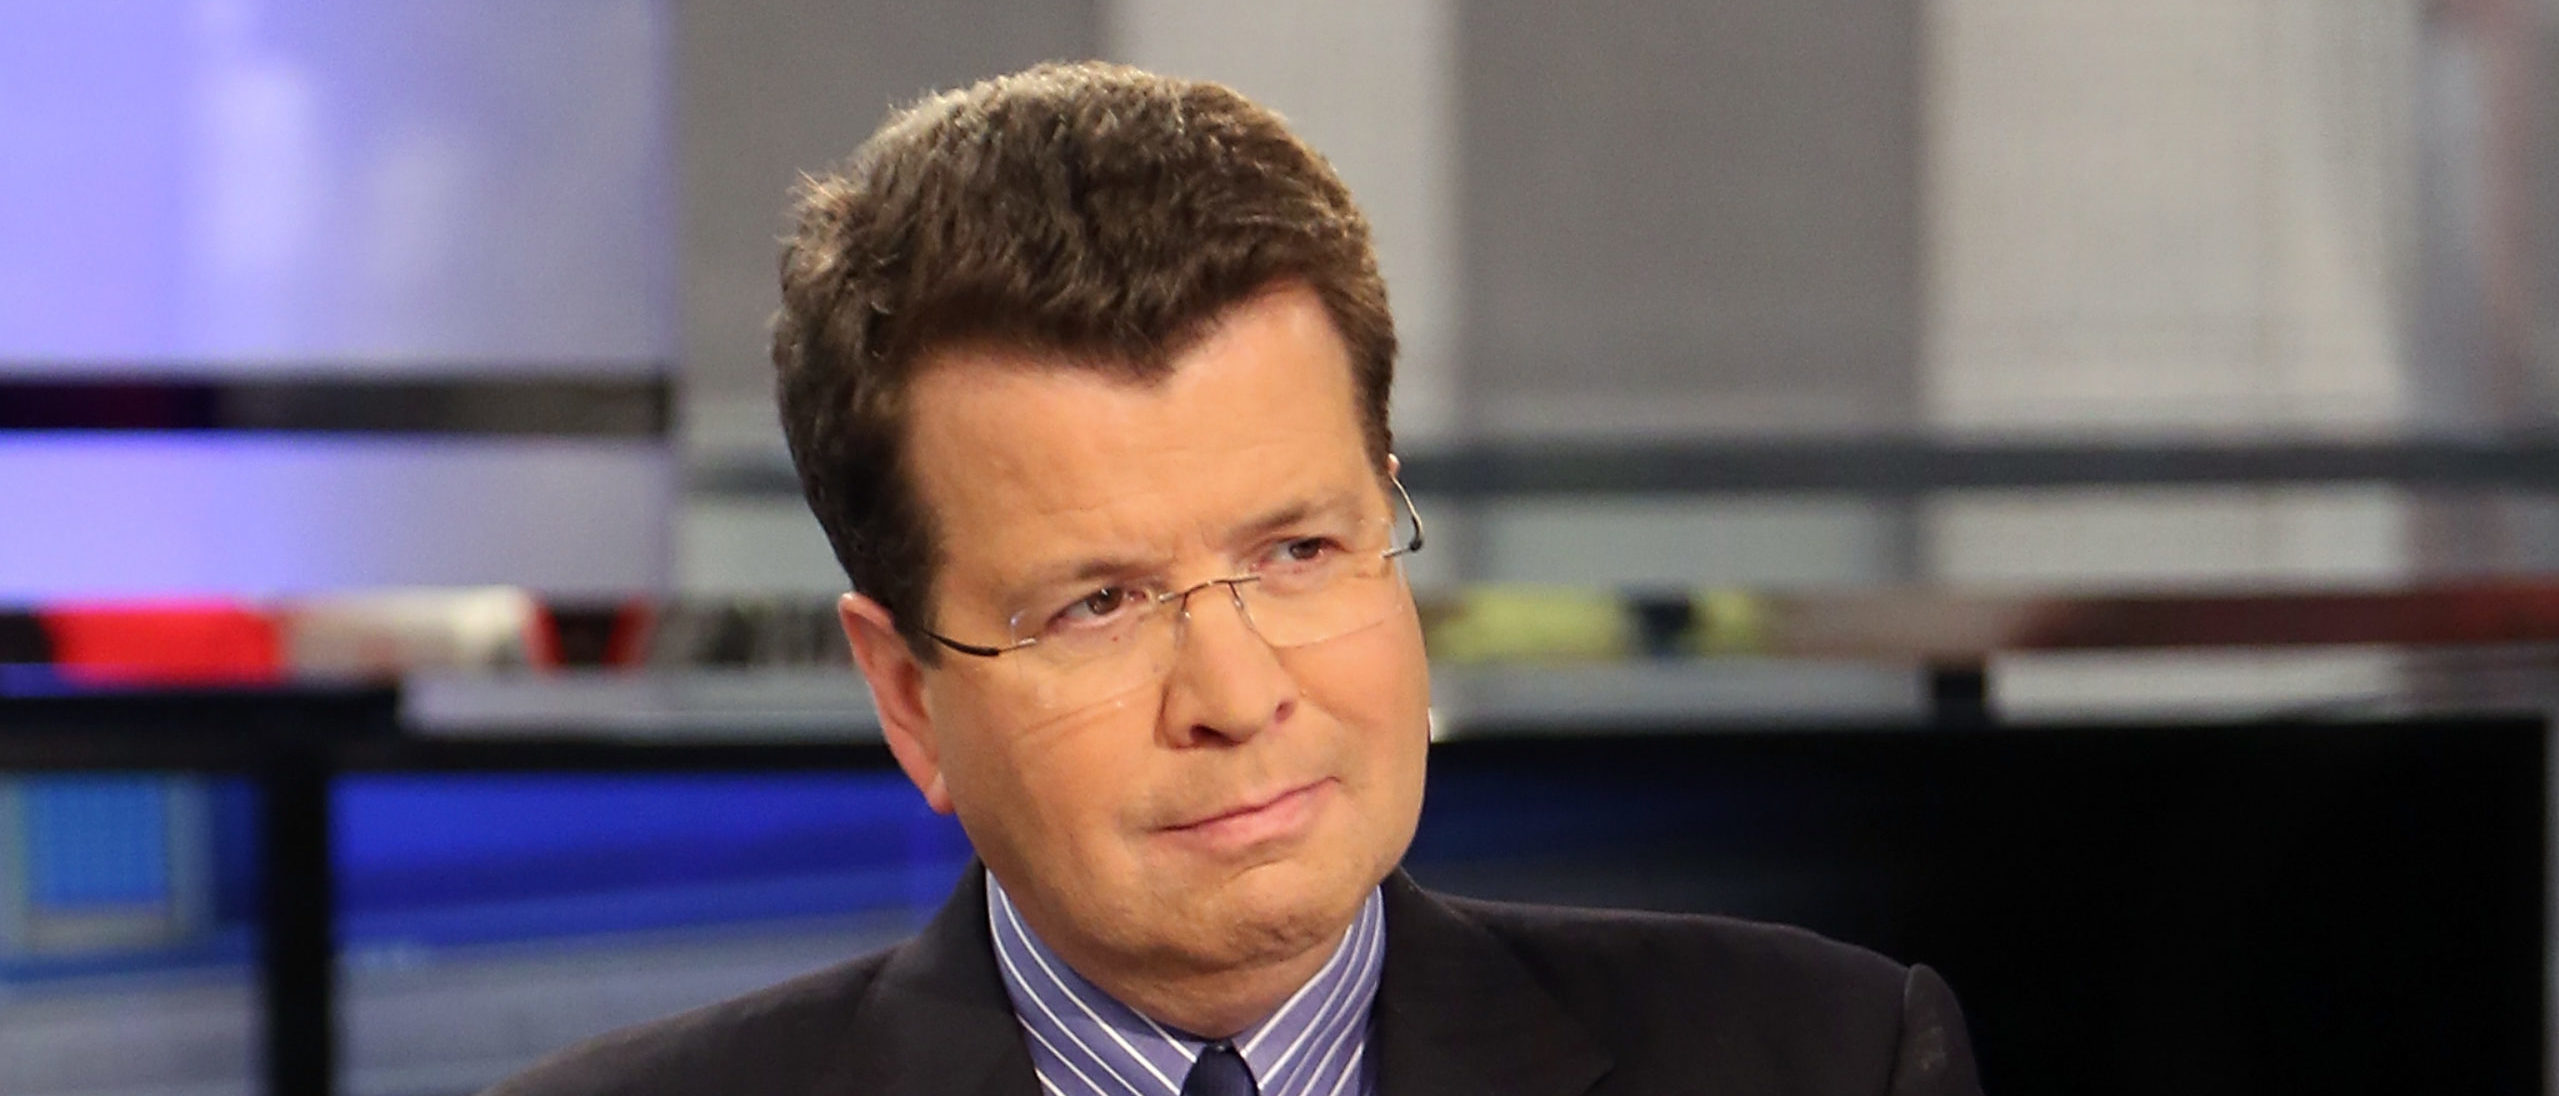 Fox News Host Neil Cavuto Tests Positive For COVID-19 | The Daily Caller